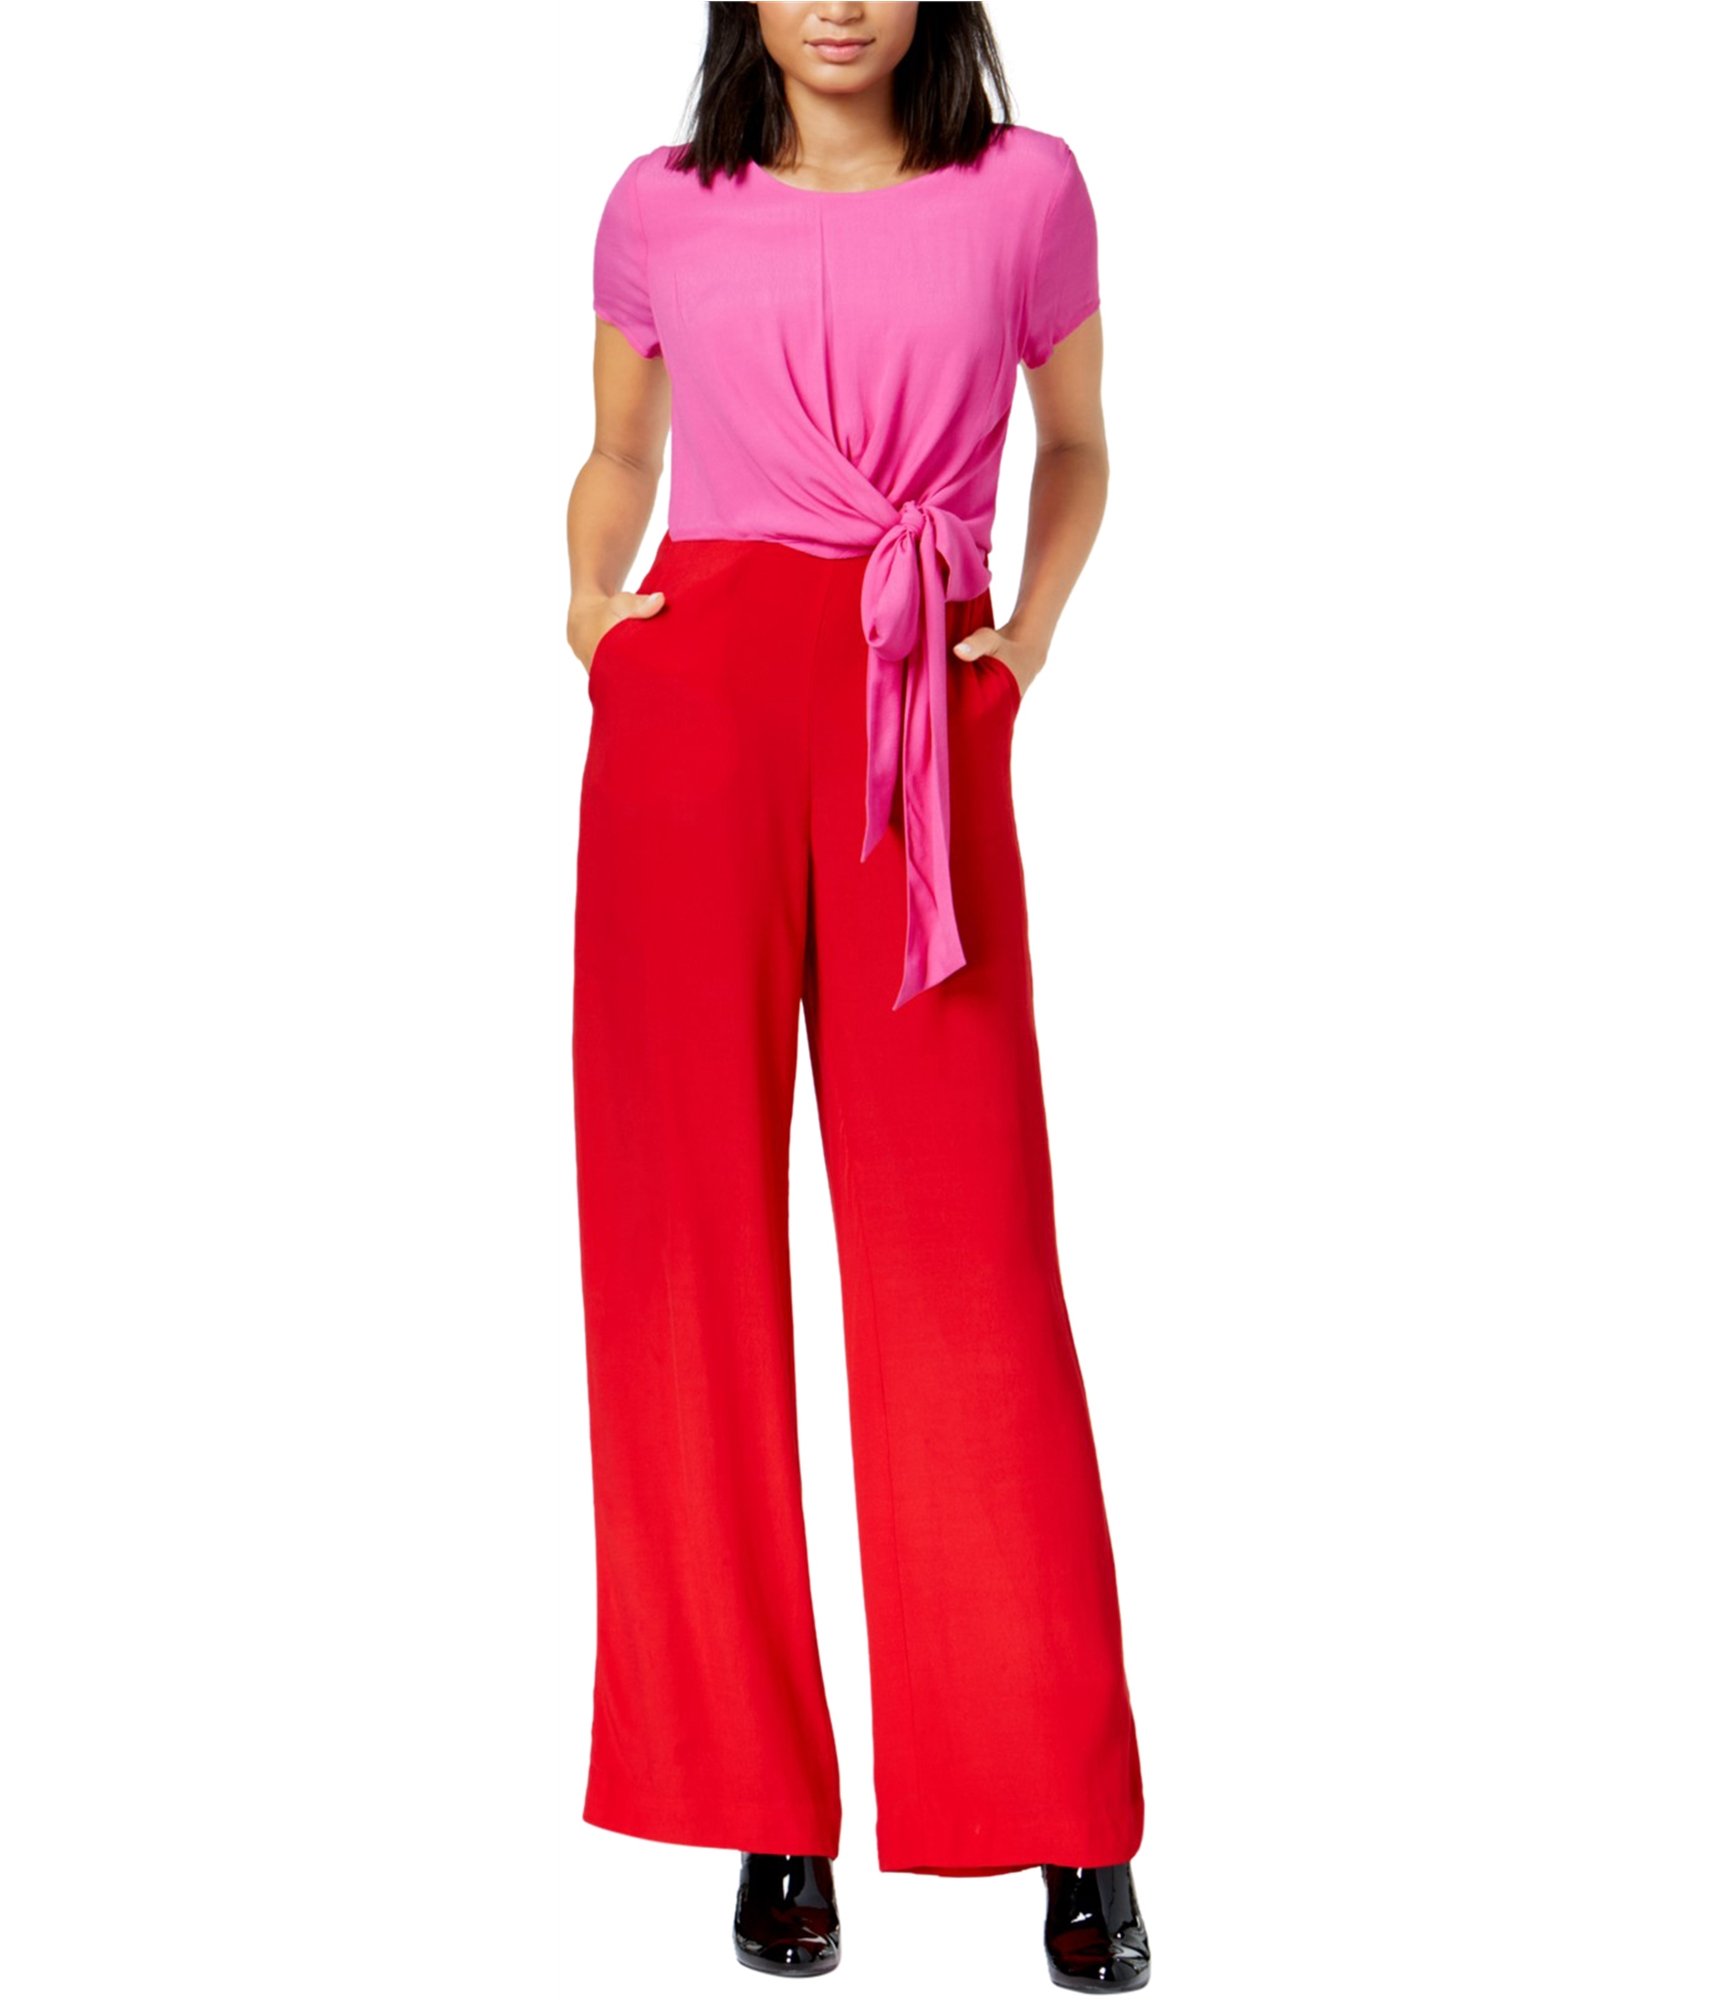 Woman-wearing-color-clashing-jumpsuit